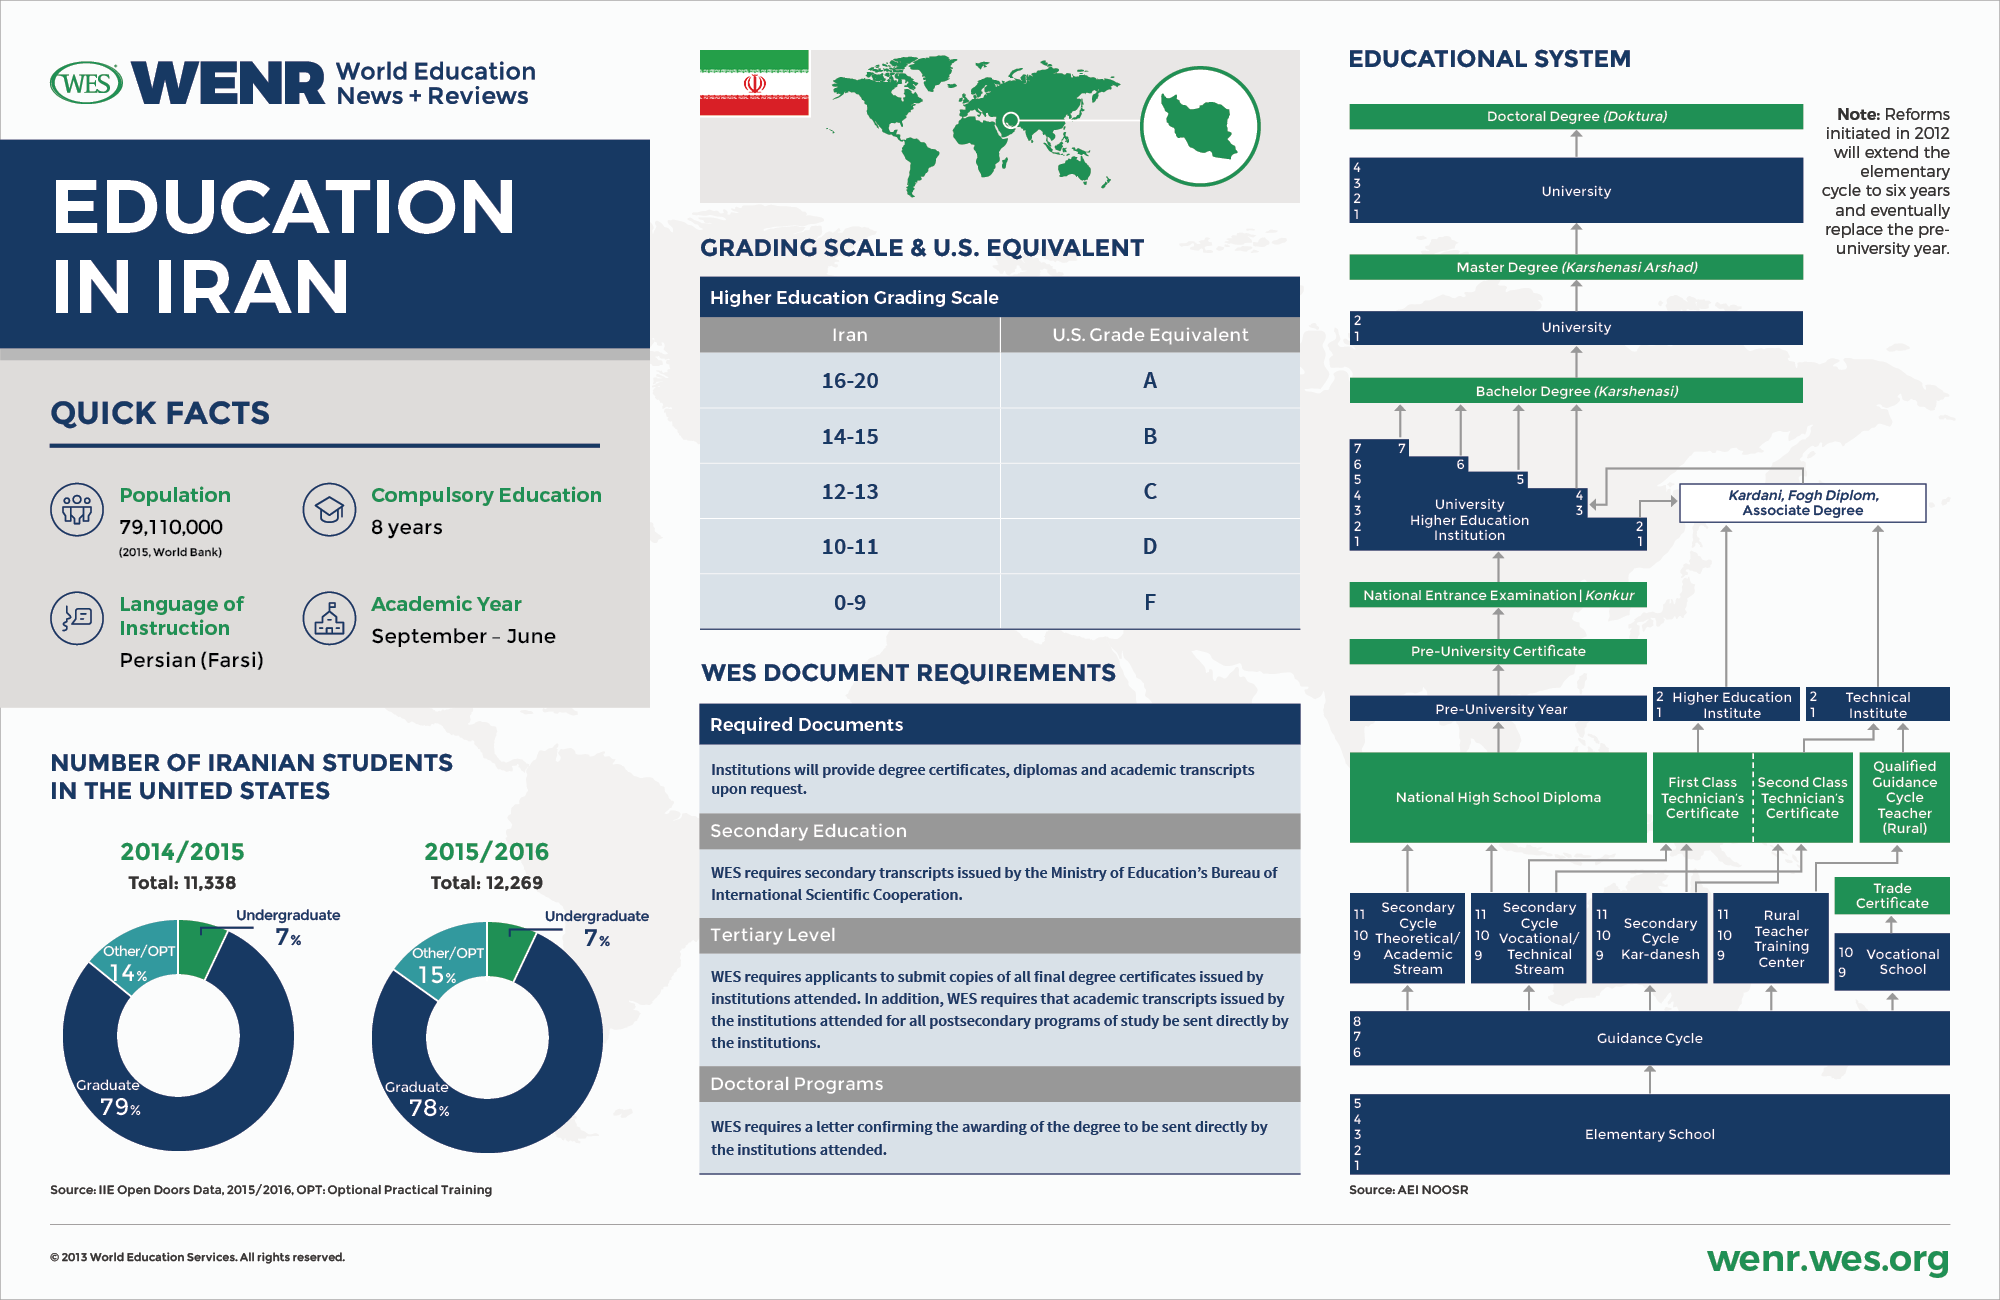 An infographic with fast facts about Iran's educational system and international student mobility landscape. 